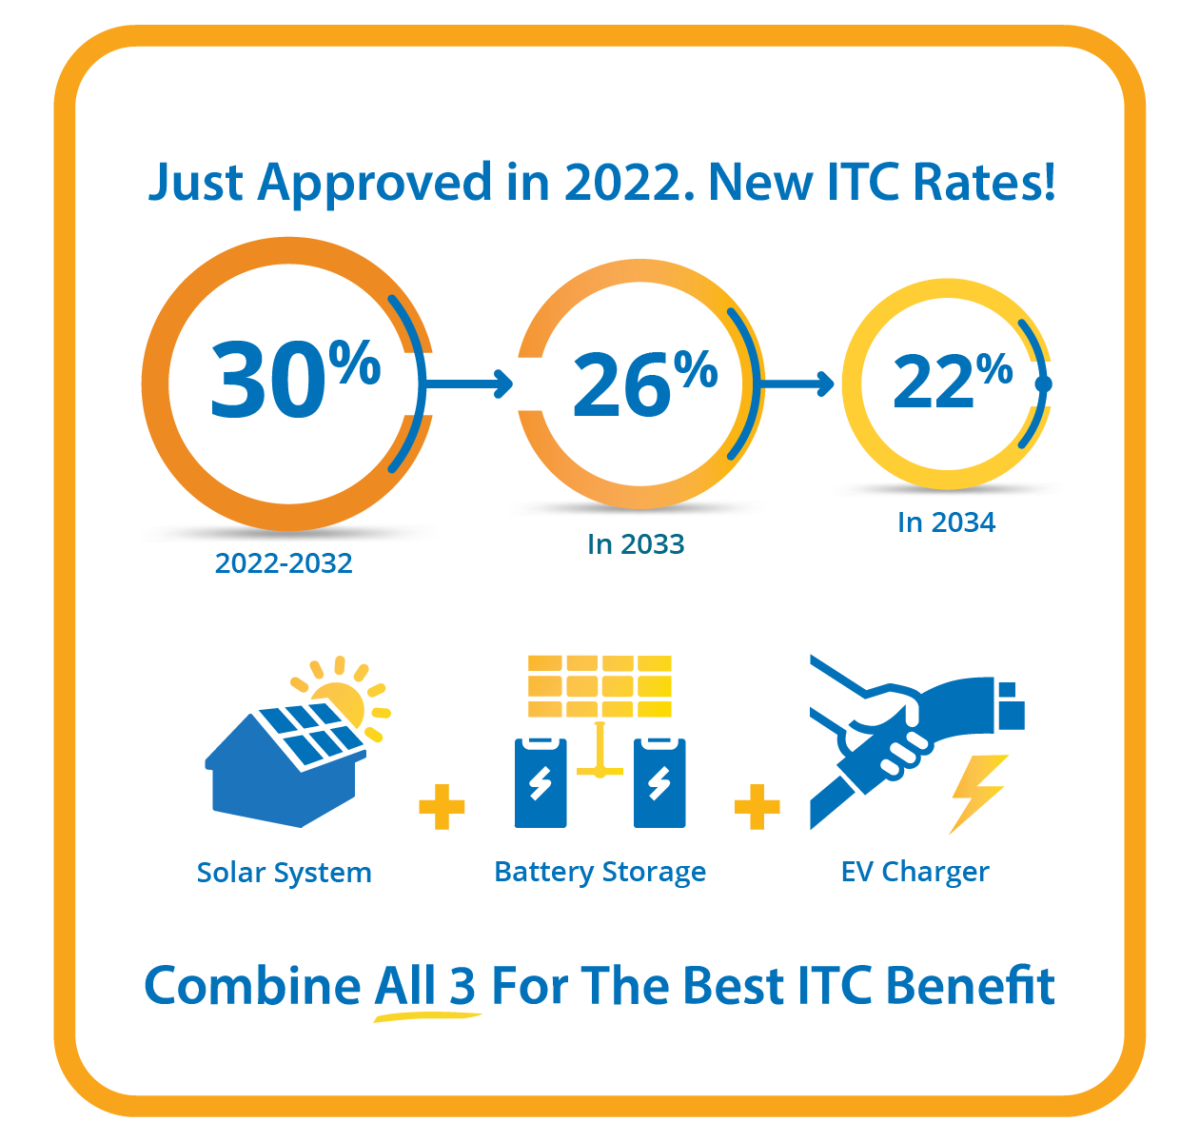 Just approved in 2022. New ITC rates! Combine all 3 for the best ITC benefit!